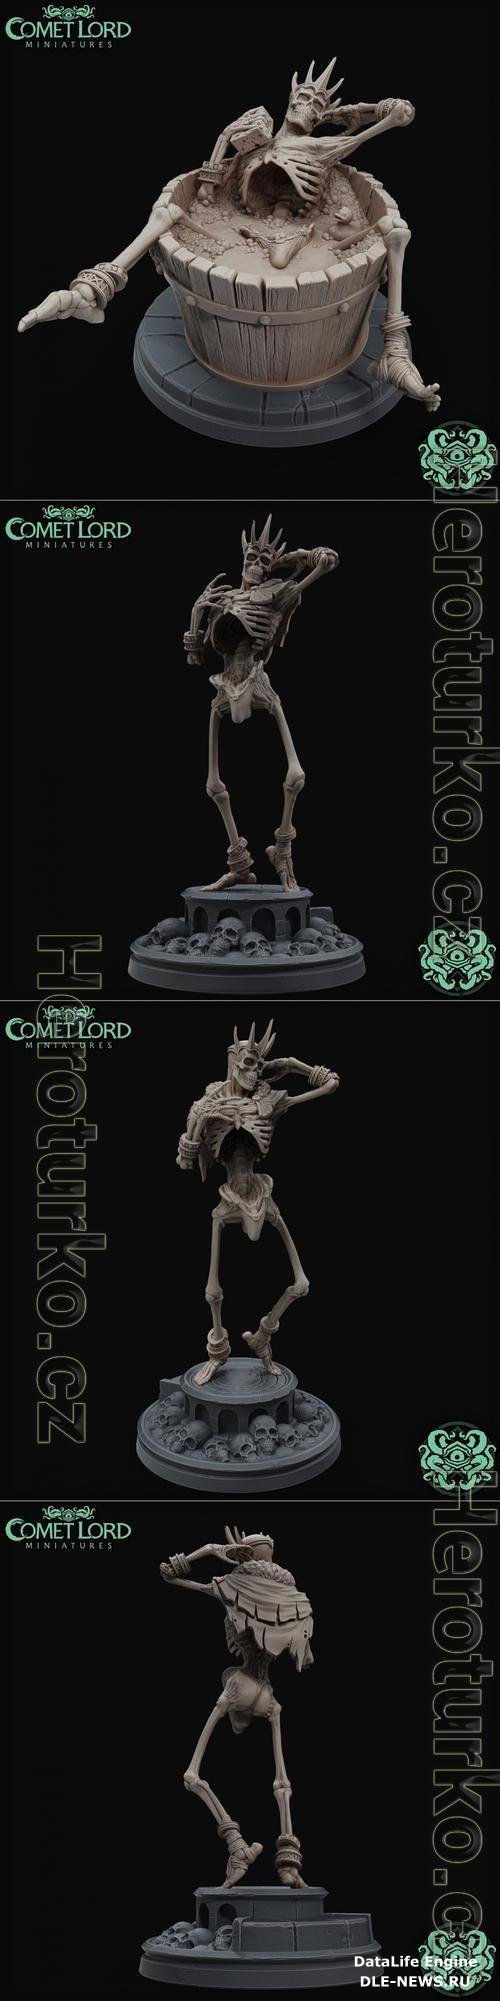 Comet Lord Miniatures - Stupid Sexy Lich 3D Print